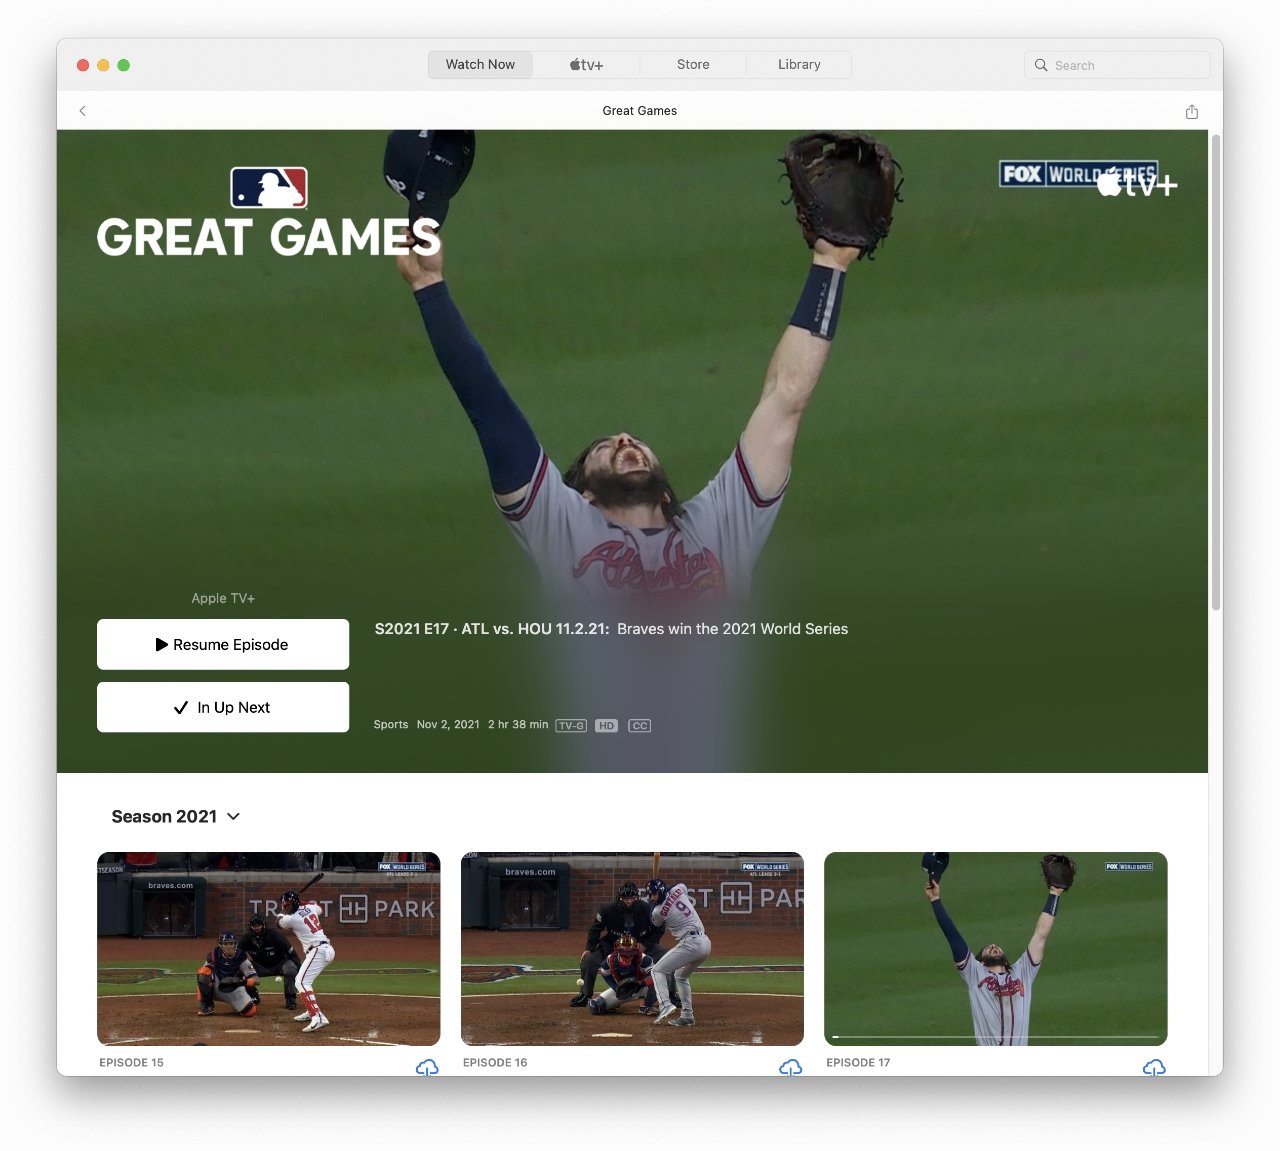 Alongside live coverage, Apple TV+ now includes archive MLB games